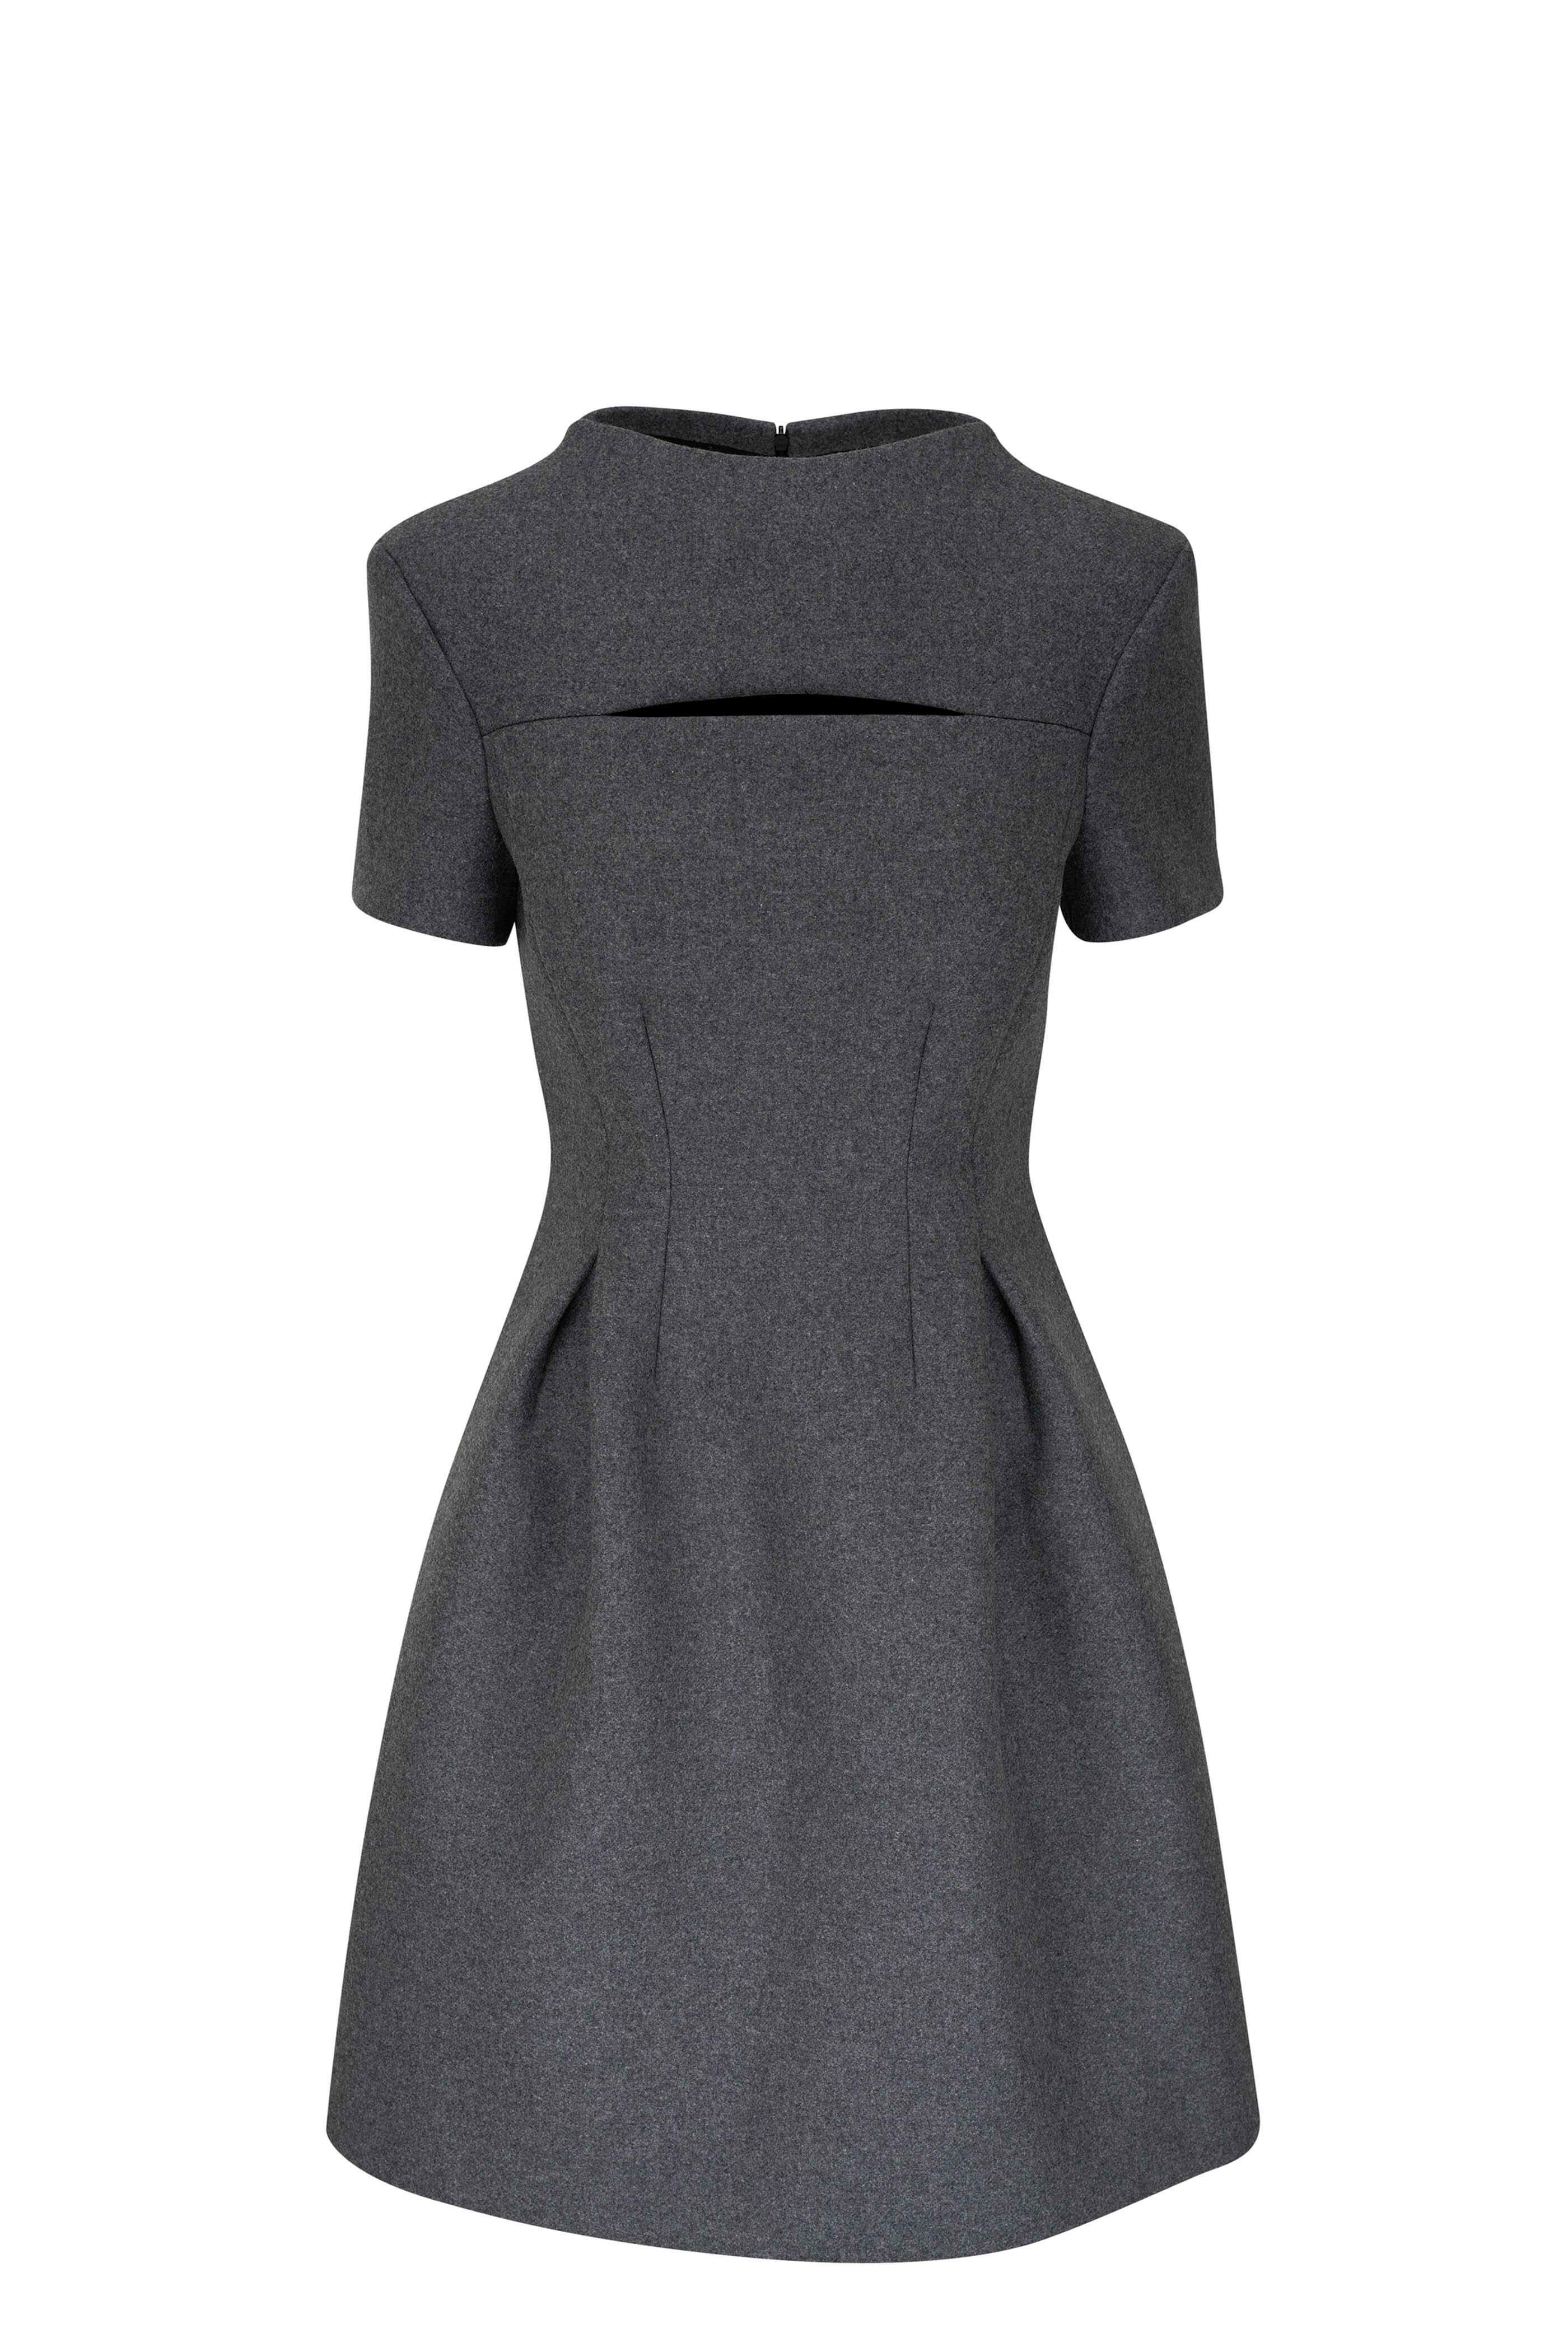 Dorothee Schumacher - Charcoal Gray Wool Flannel Cut-Out Mini Dress